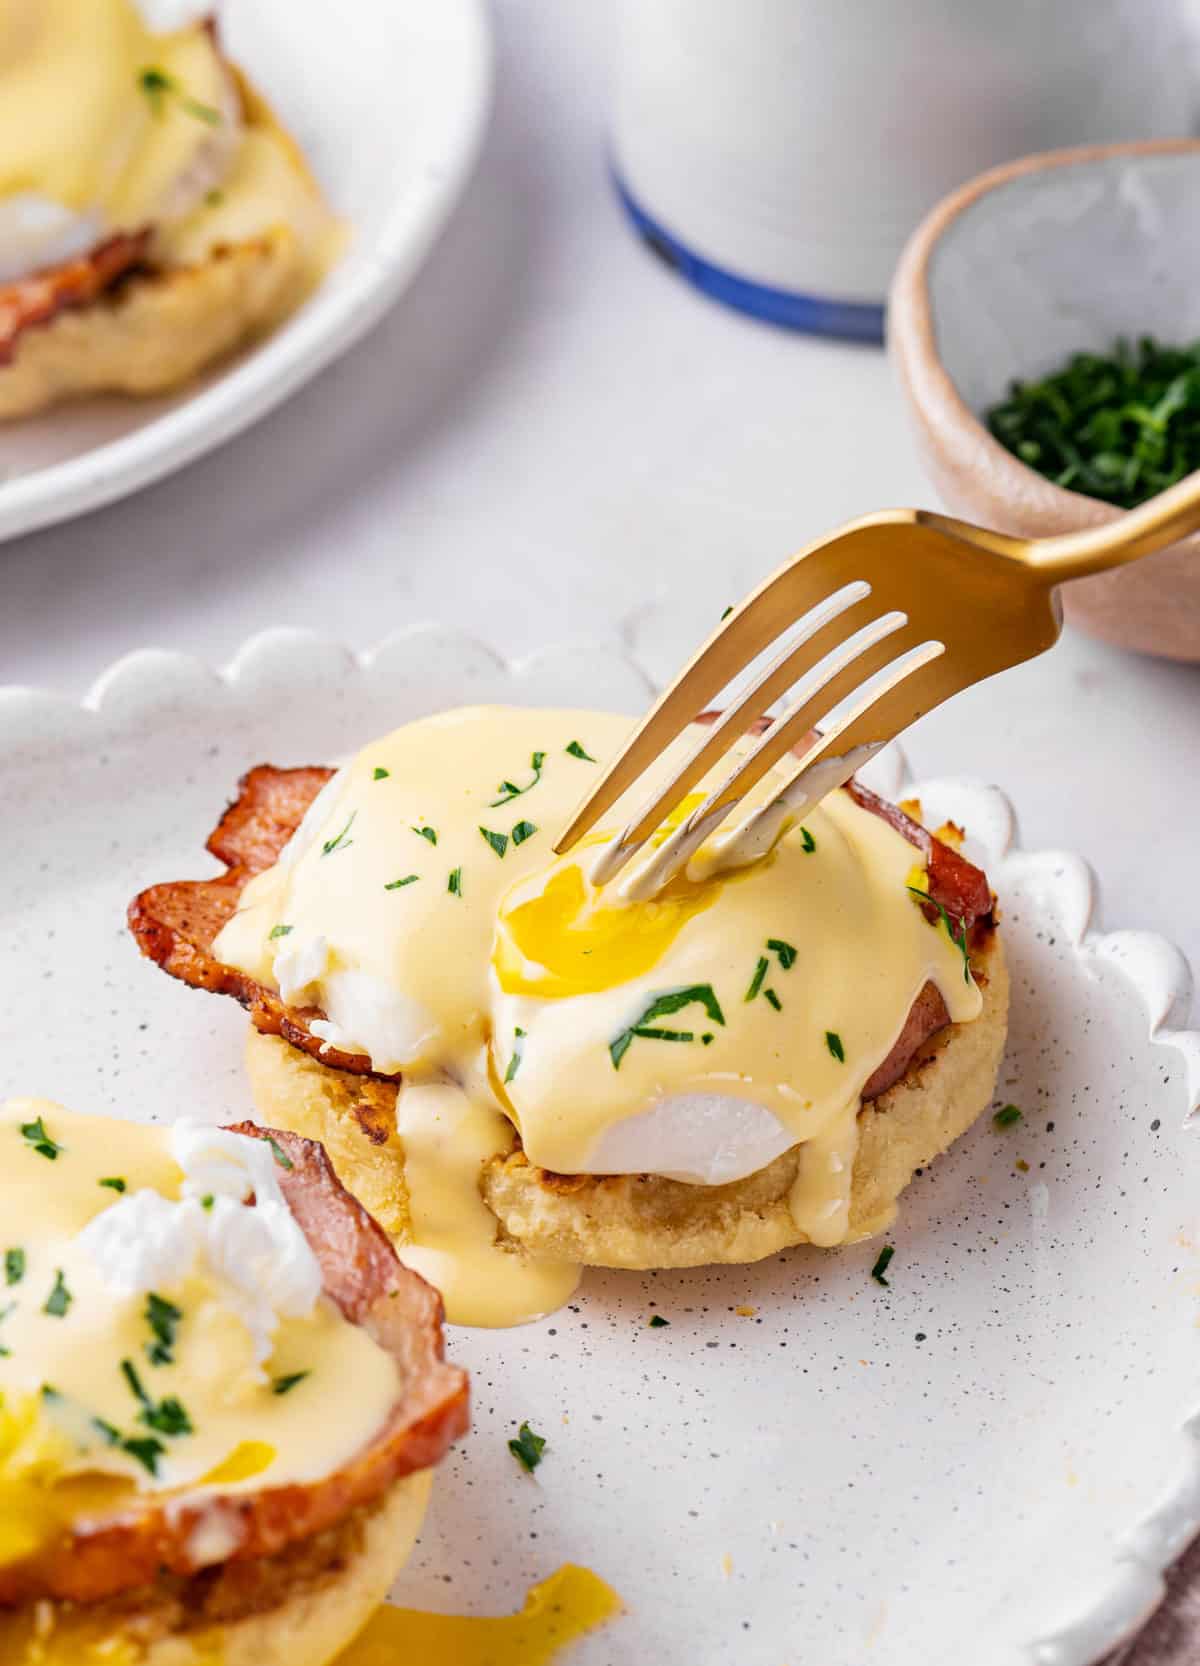 eggs benedict with ham, poached eggs, and homemade hollandaise sauce served on a speckled and scalloped plate with a gold fork cutting into the egg